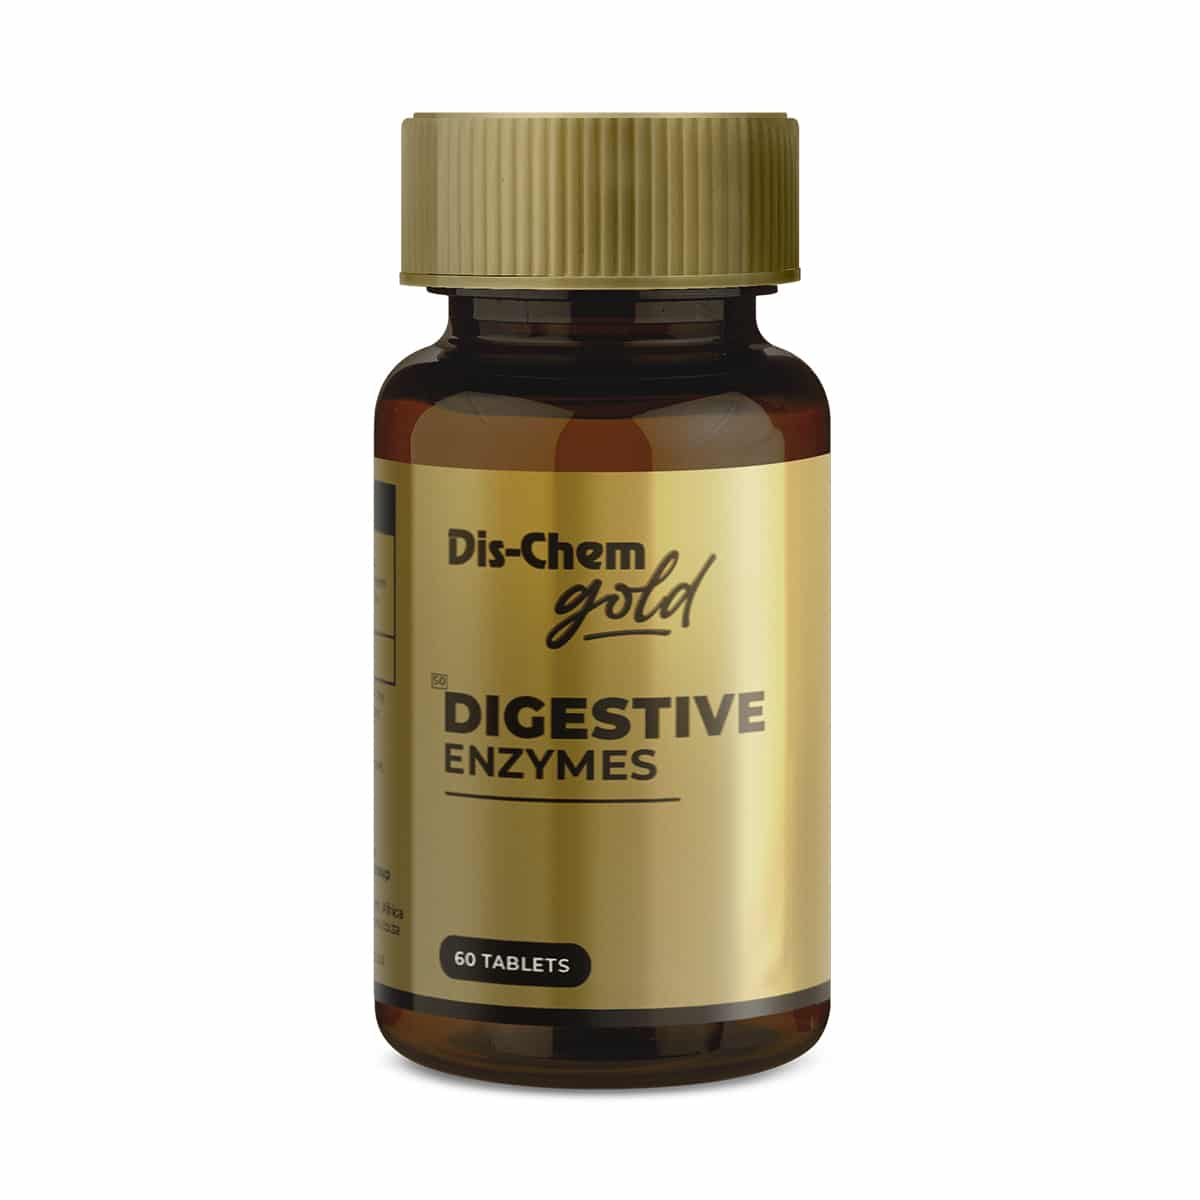 Dis-Chem Gold Digestive Enzymes - 60 Tabs